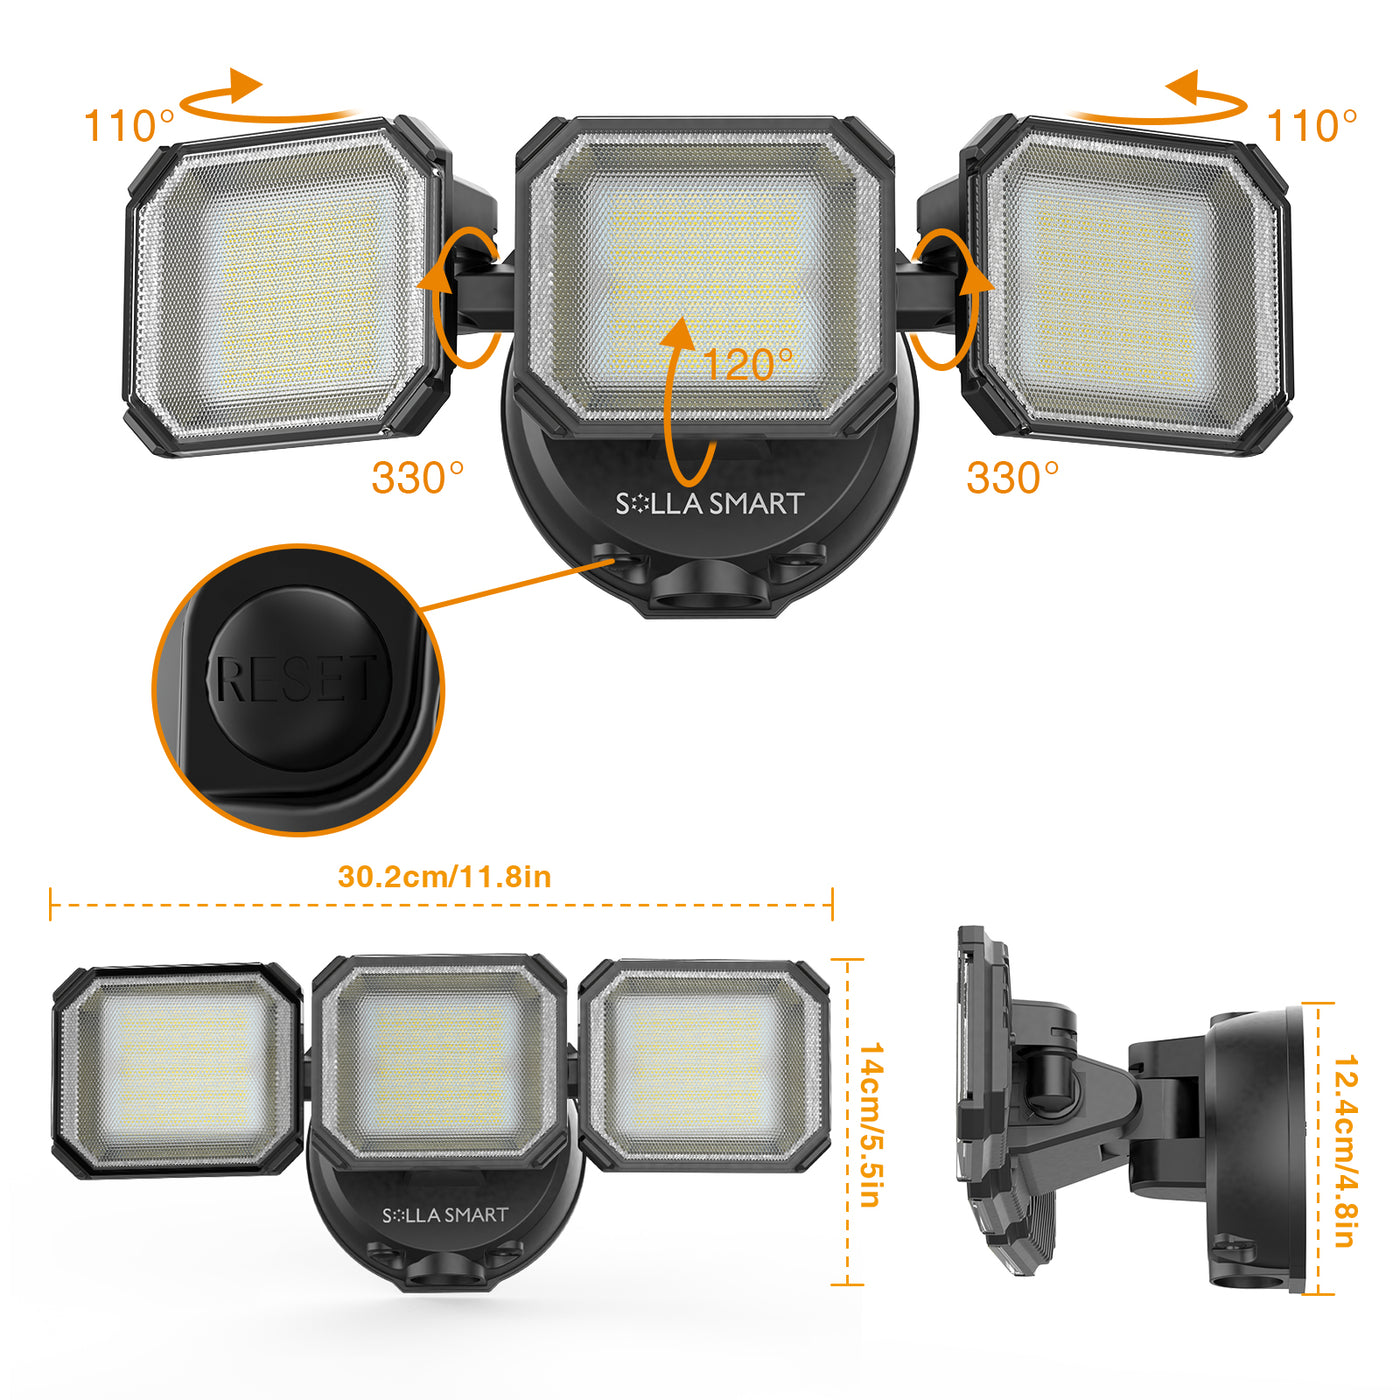 50W Dusk to Dawn Security Lights Outdoor, 7000LM Smart LED Floodlight, App Control Tunable White 2700K-6500K, IP65 Waterproof 3 Adjustable Heads Exterior Floodlights for Garage, Yard, Porch